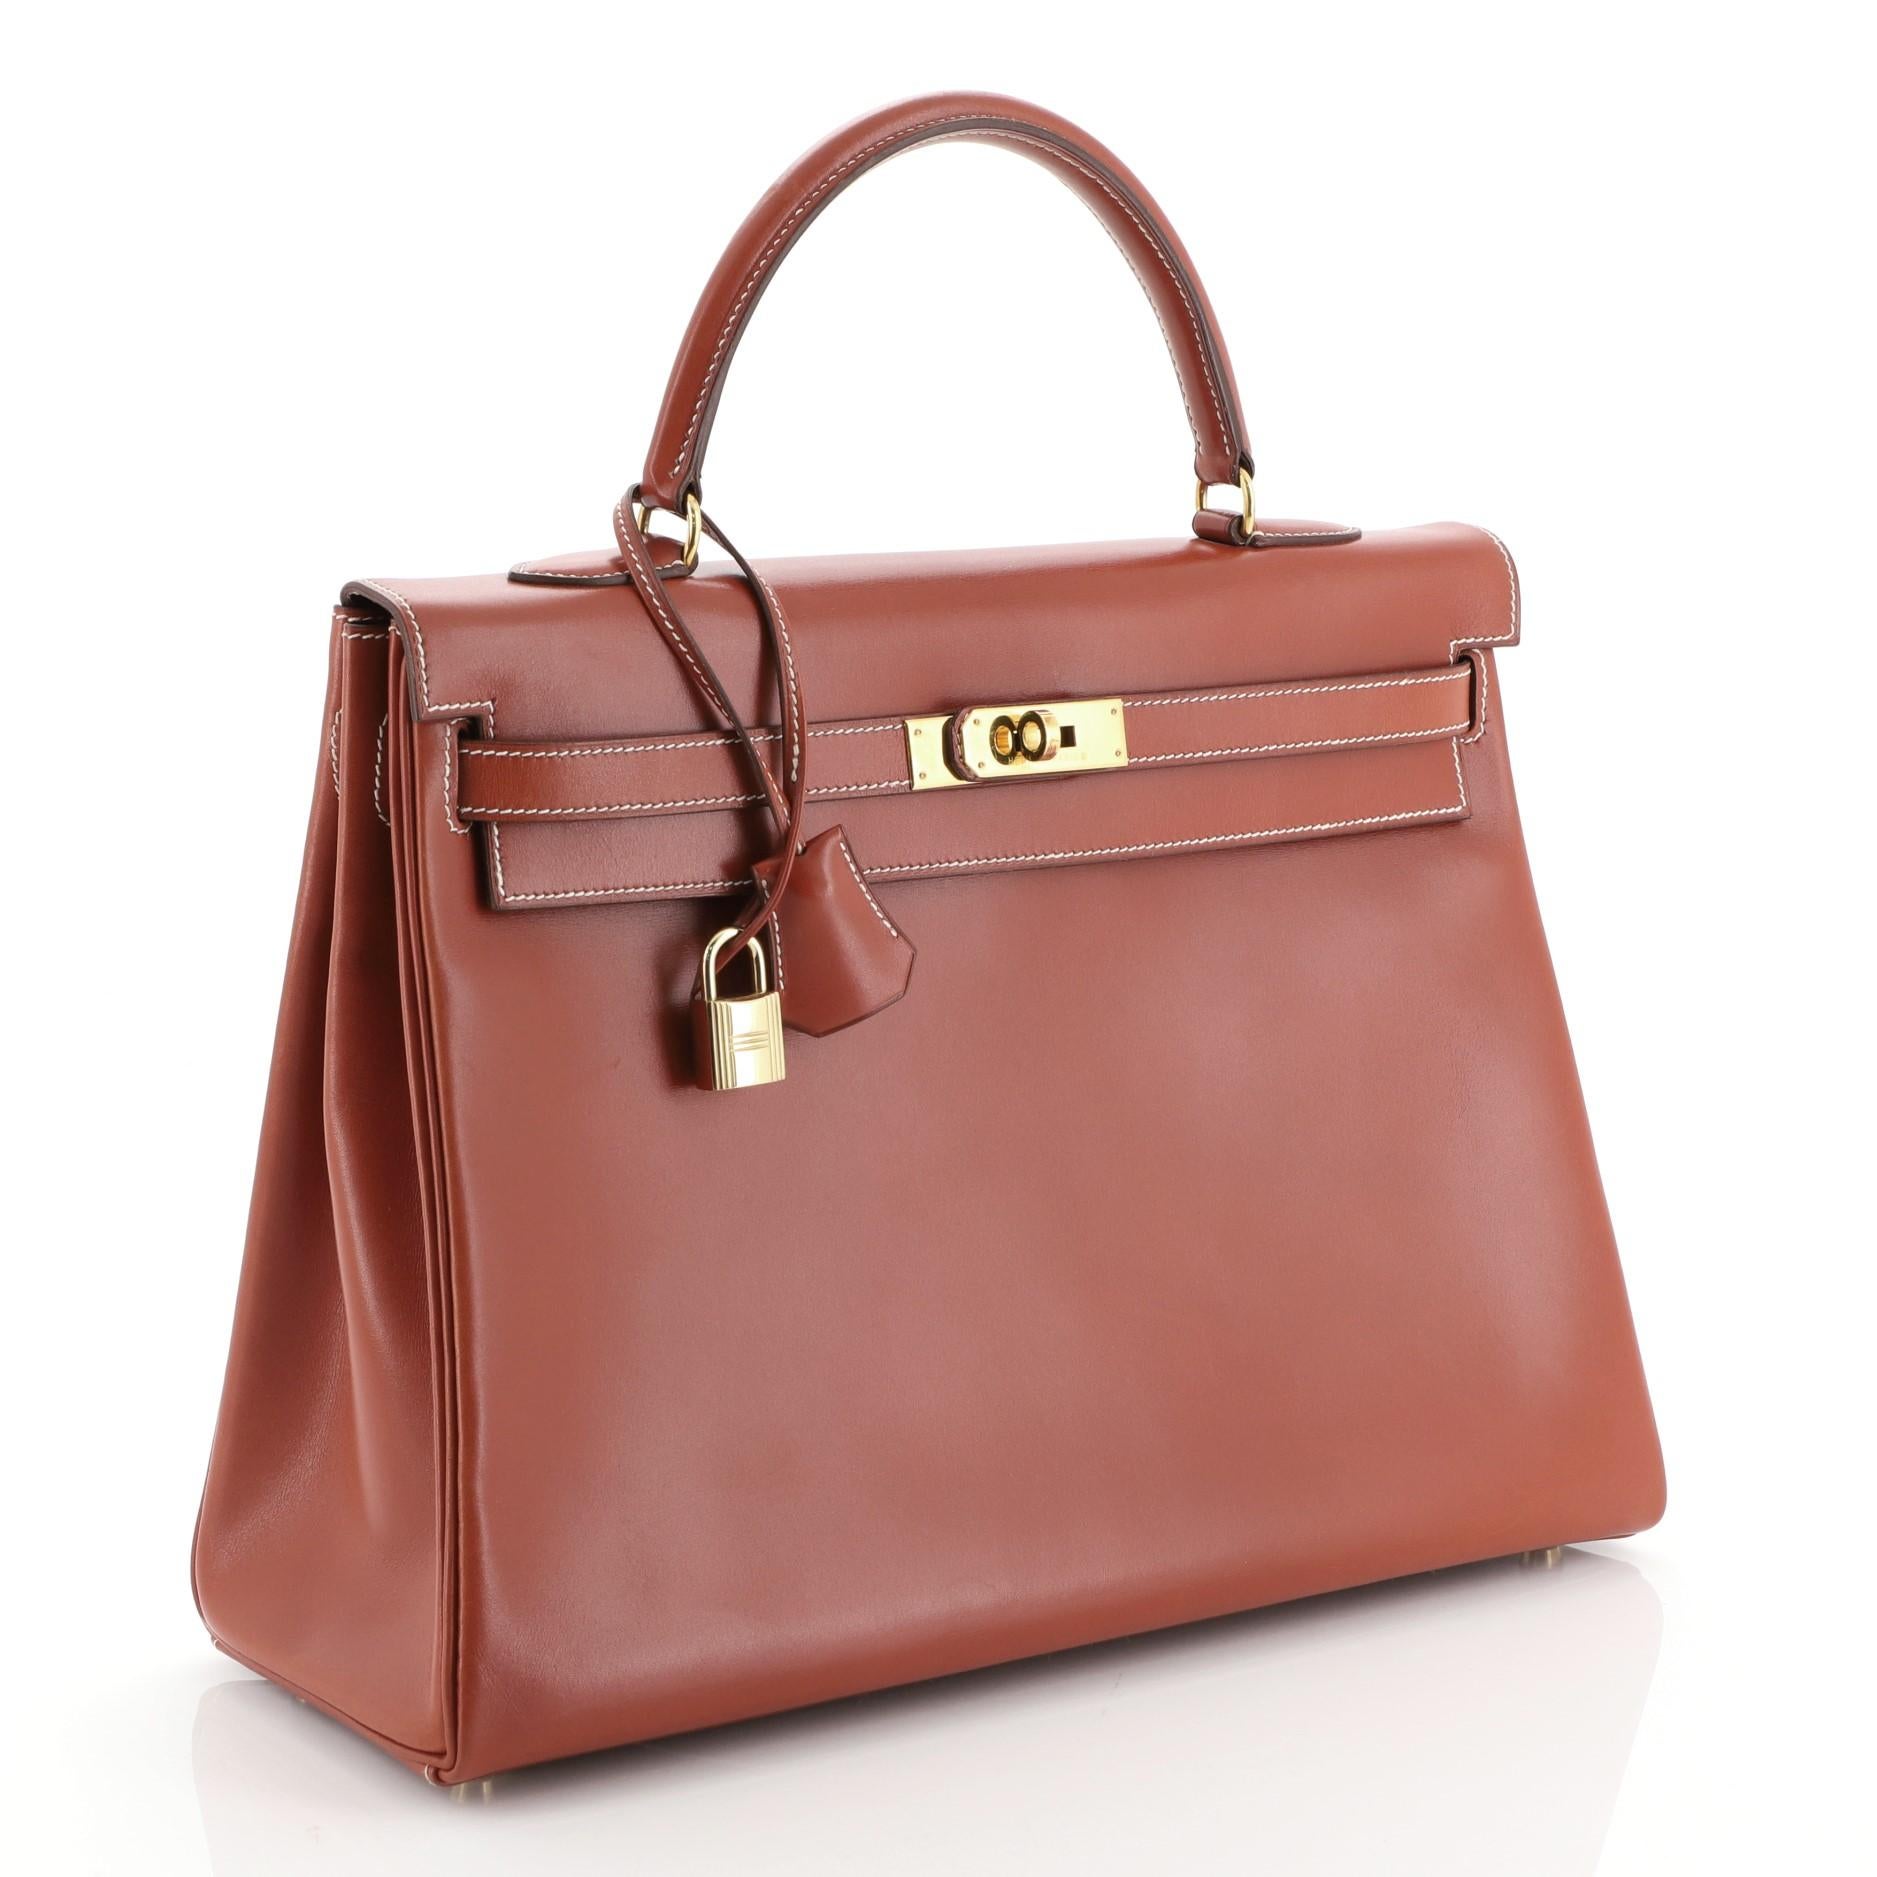 This Hermes Kelly Handbag Brique Box Calf with Gold Hardware 35, crafted in Brique orange Box Calf leather, features a single top handle, protective base studs, and gold hardware. Its turn-lock closure opens to a Brique orange Chevre leather